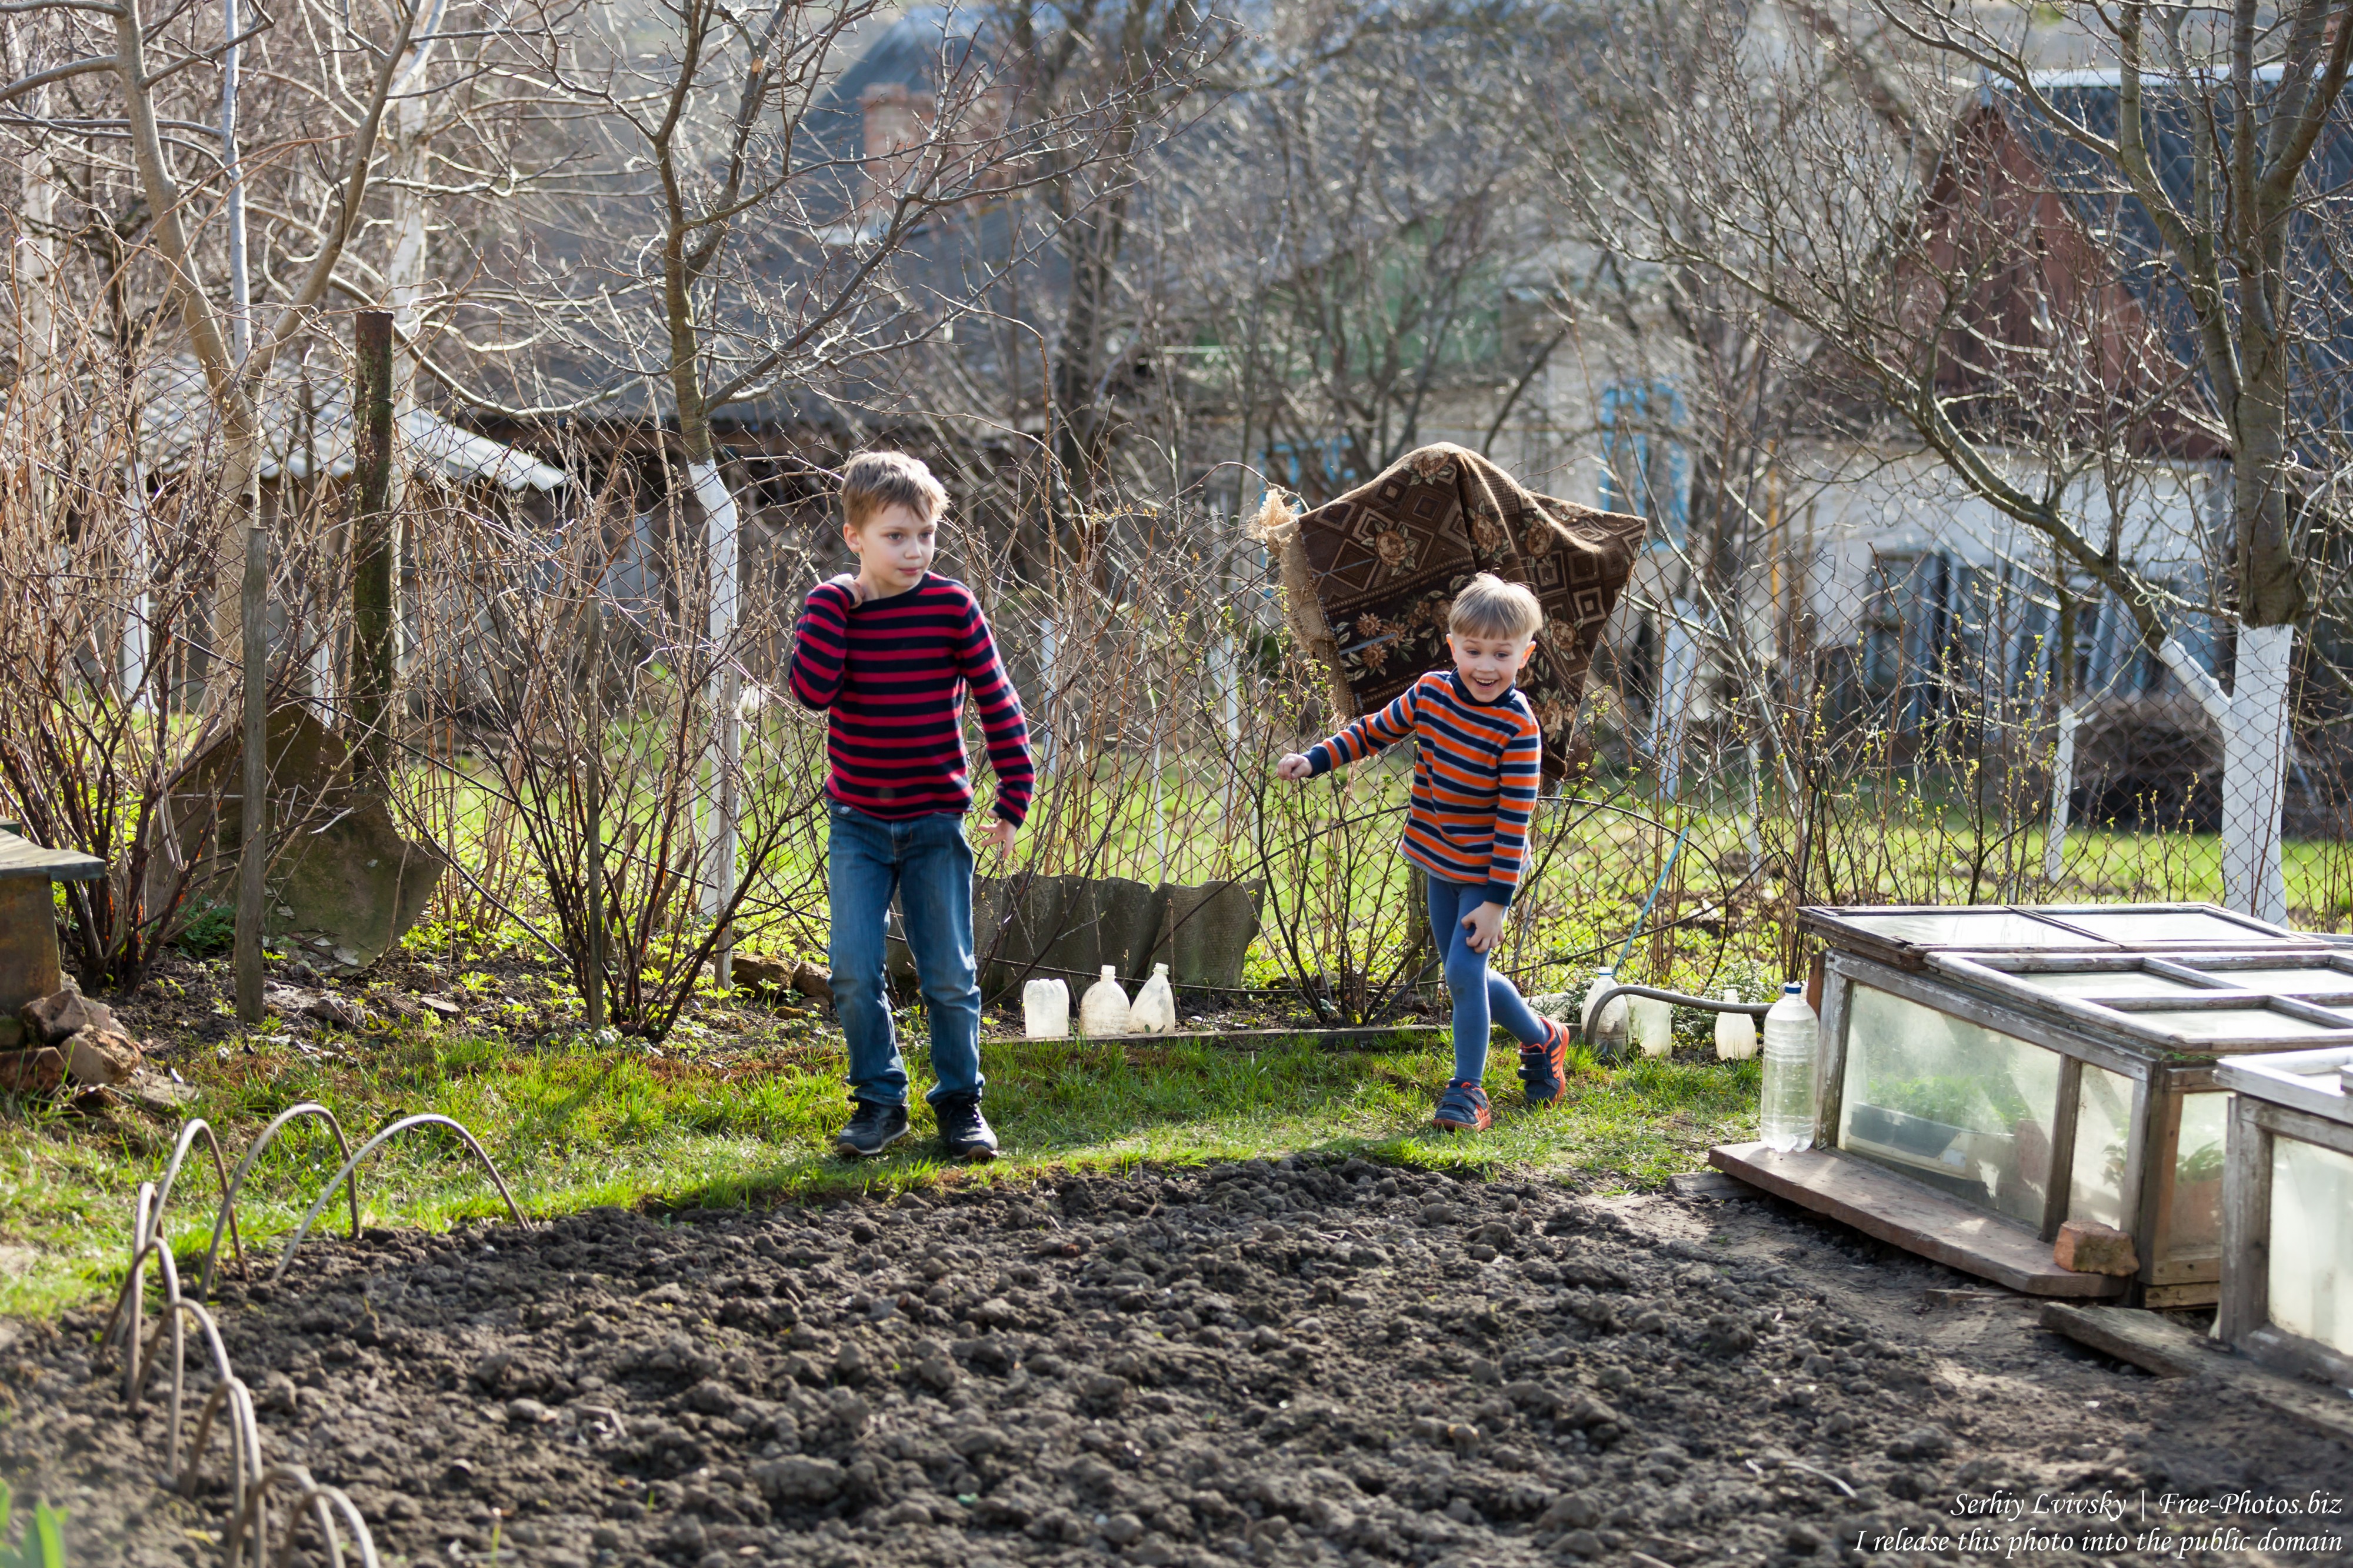 children in a garden in April 2018 photographed by Serhiy Lvivsky